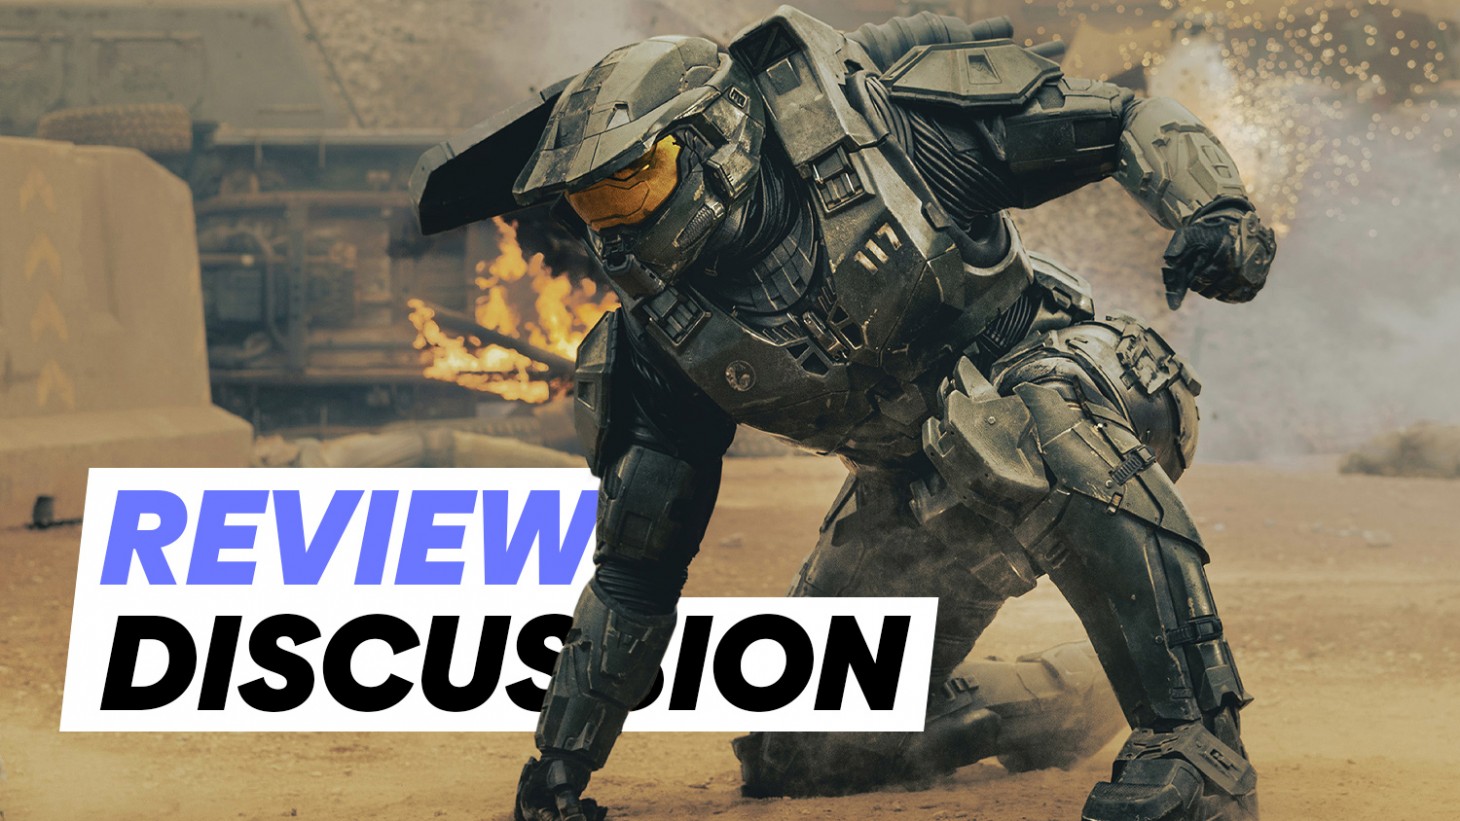 Halo Series Episode 3 Review - Cortana Saves The Day - Game Informer